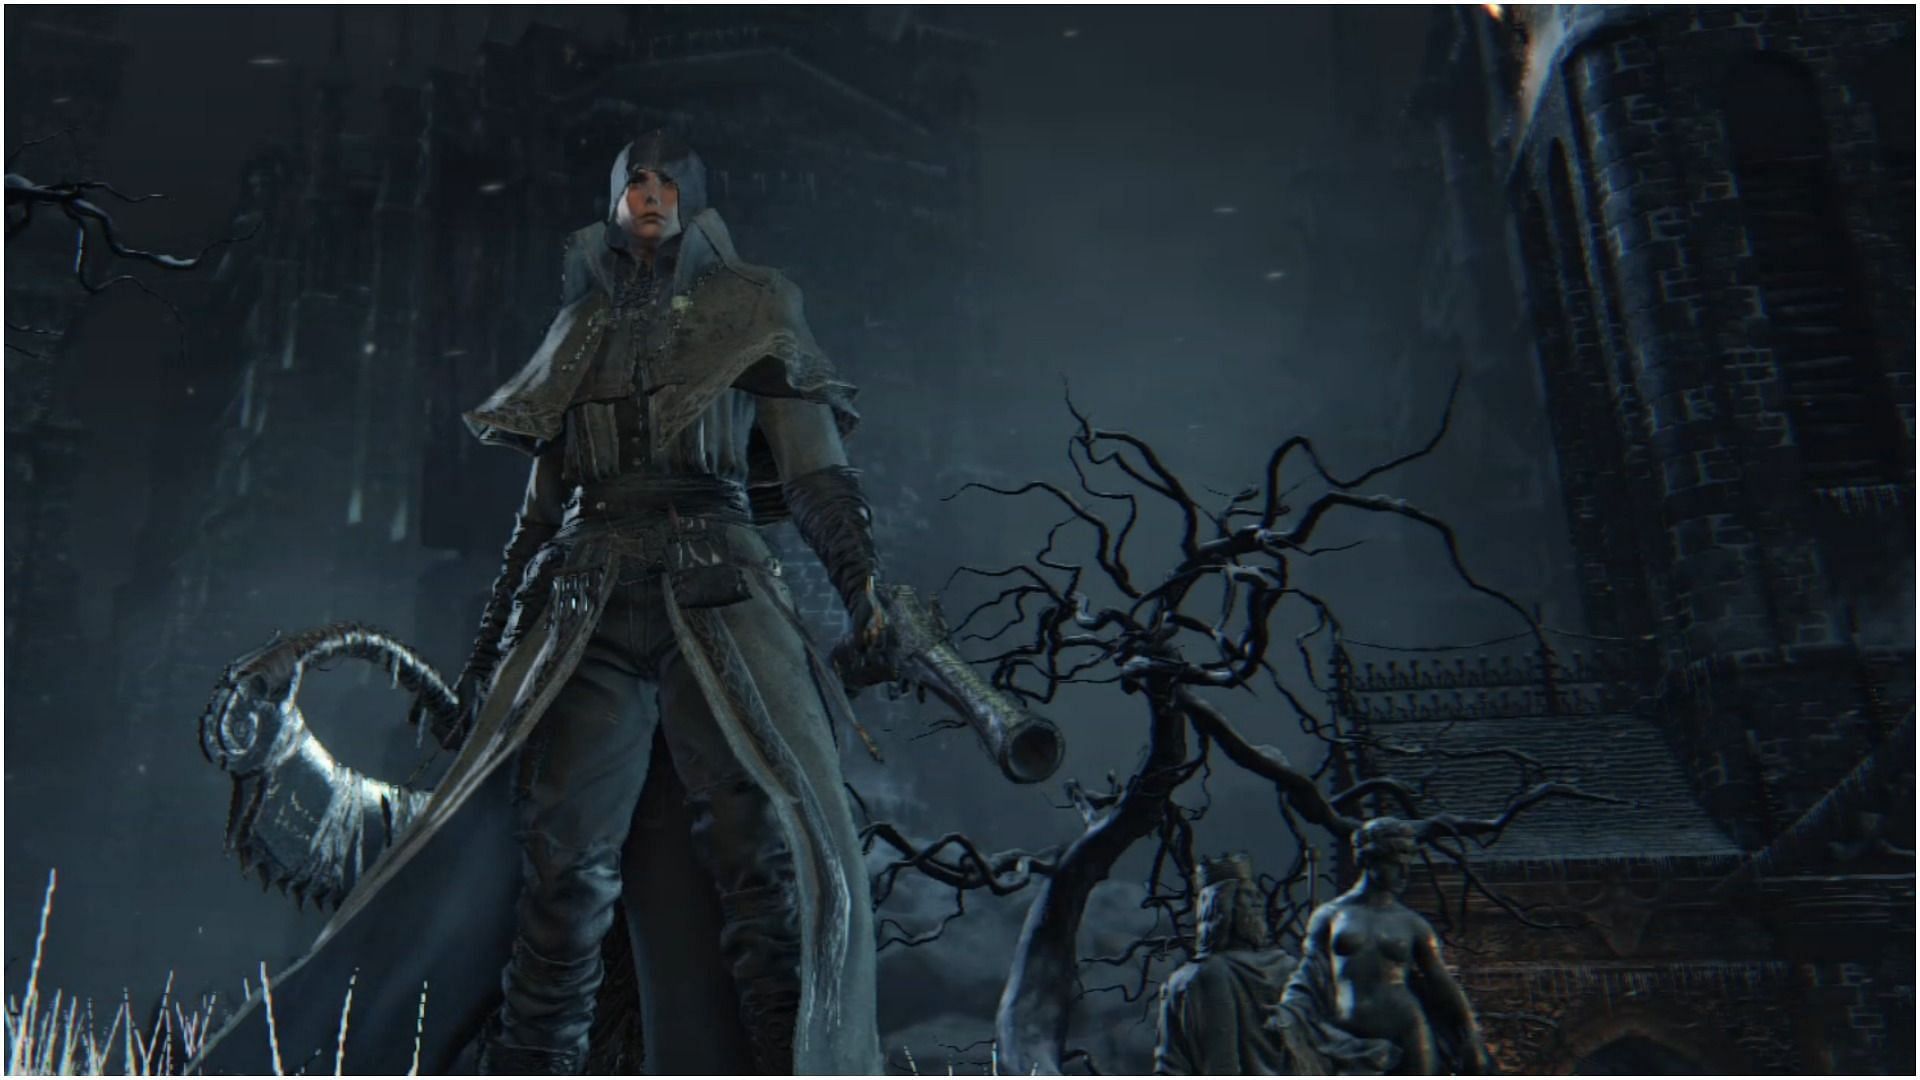 The Hunter prowls the streets of Yharnam (image via FromSoftware)